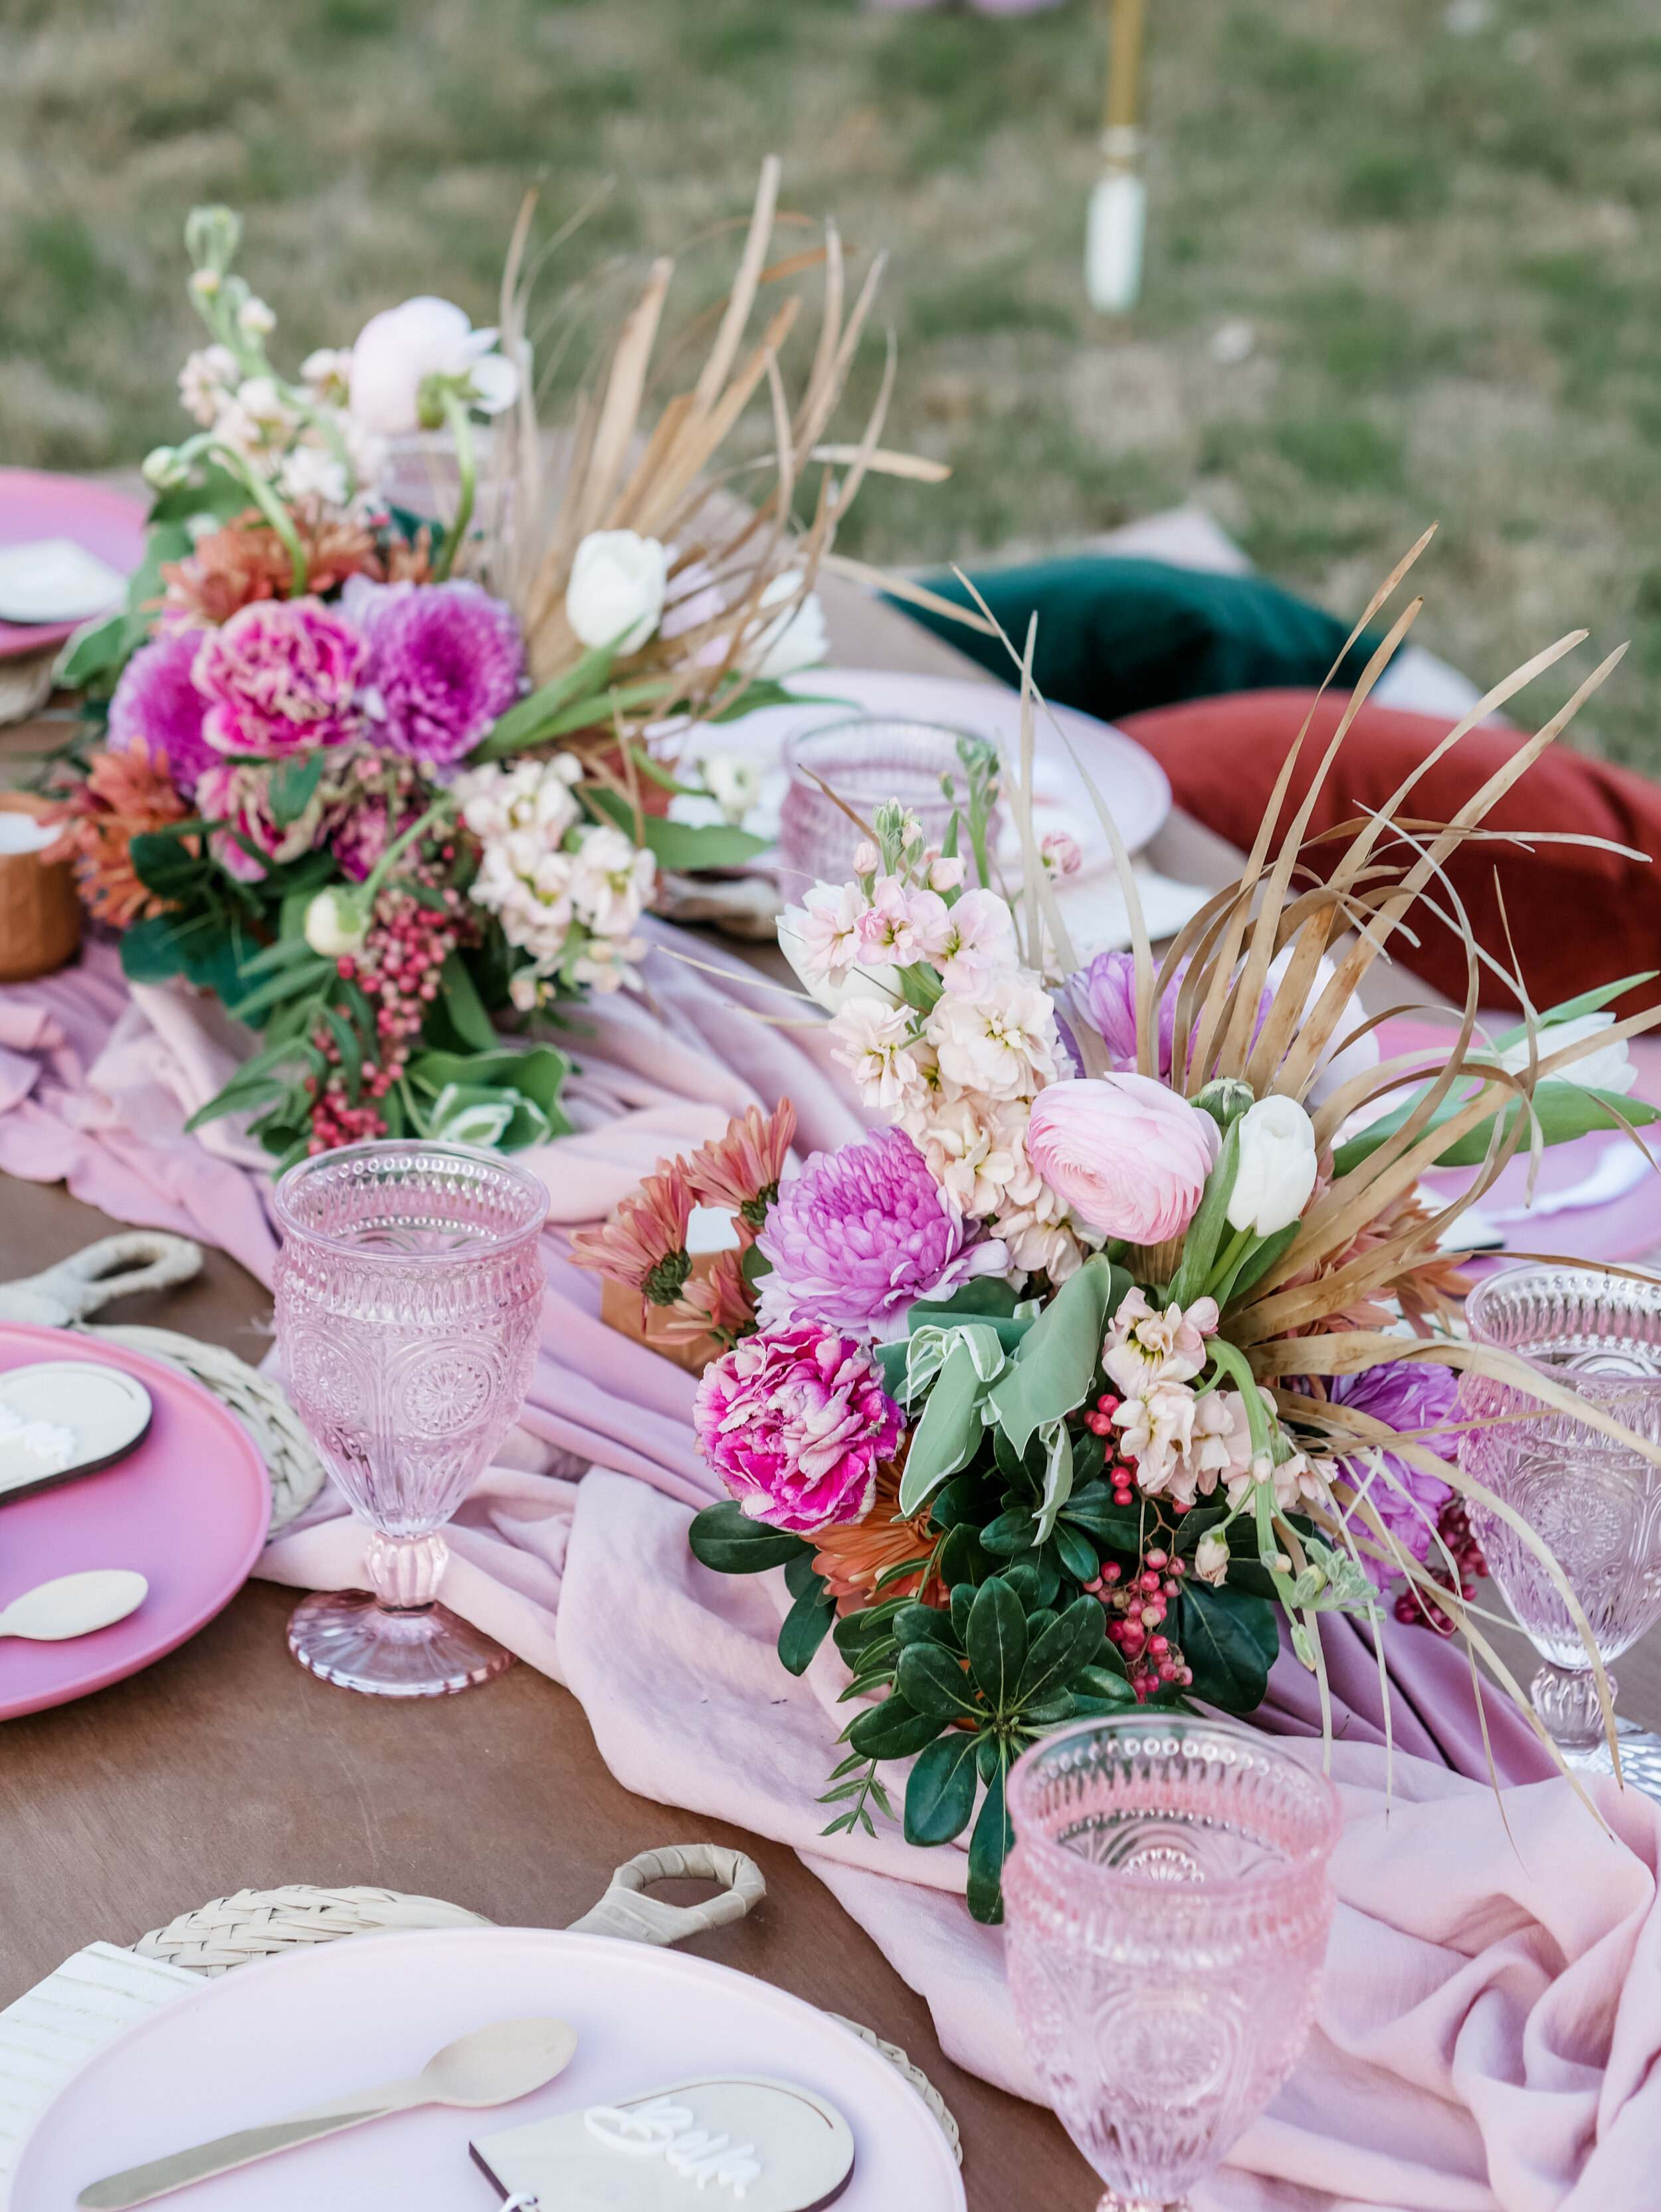  Boho Chic Table Setting for a luxury backyard Glamping experience - with large rentable tent and picnic area from MINT Event Design in Austin, TX! Perfect for teen slumber parties, birthday parties, or bachelorette parties. See how event designer Ca